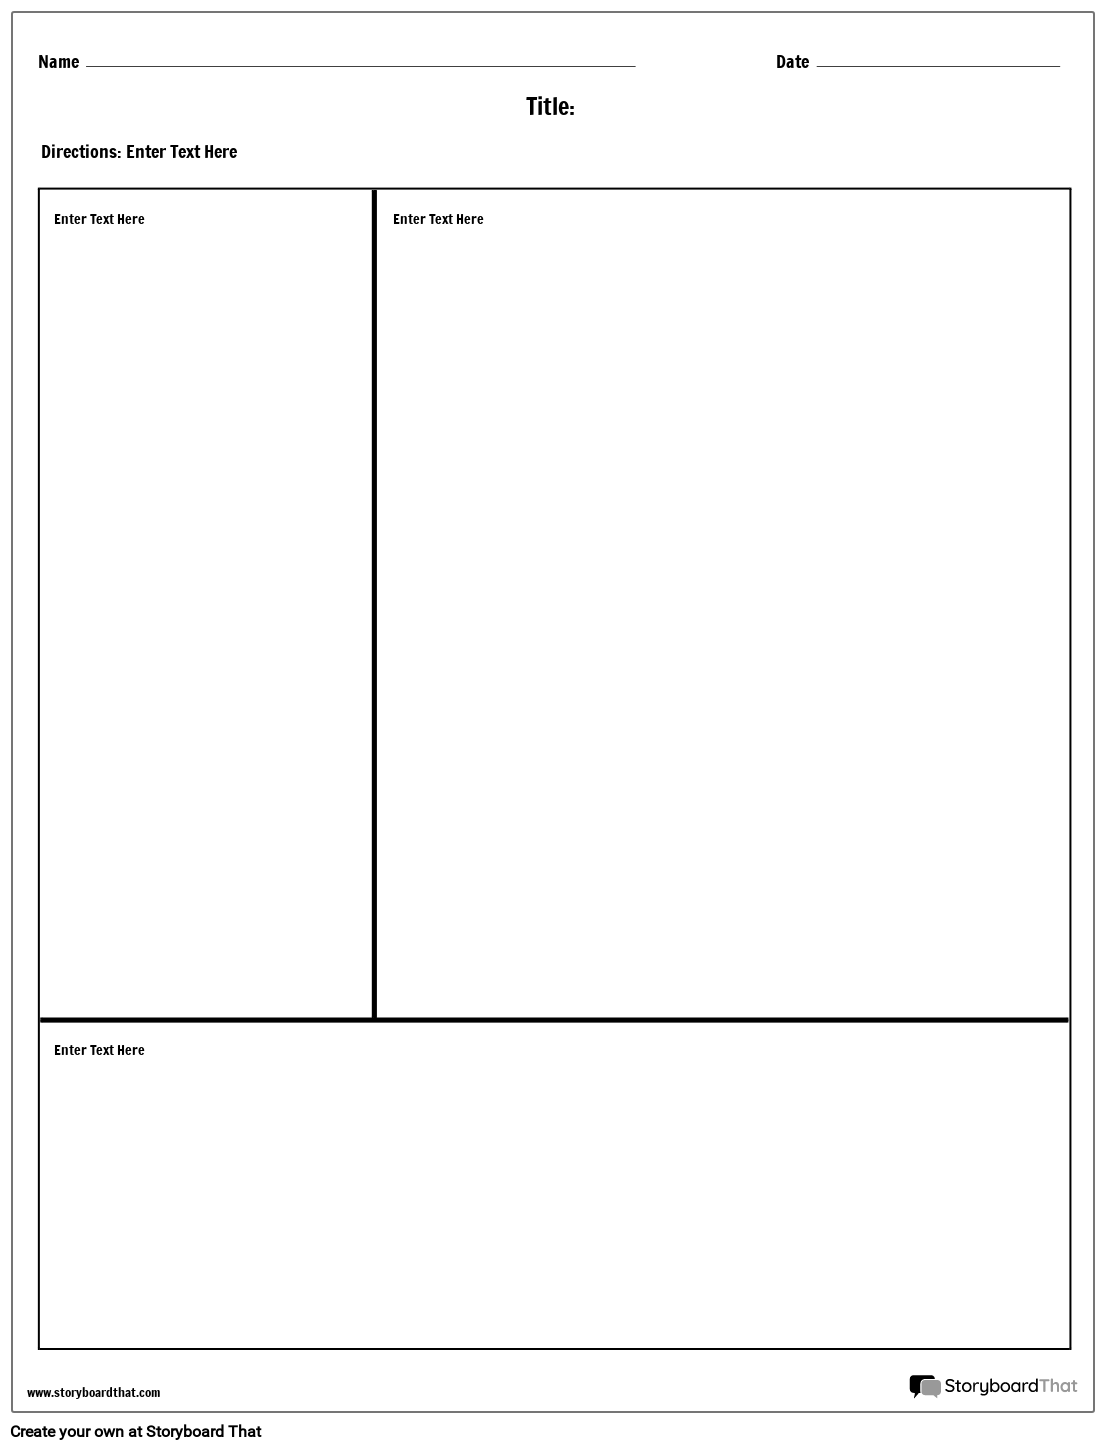 Cornell Notes - Basic Template